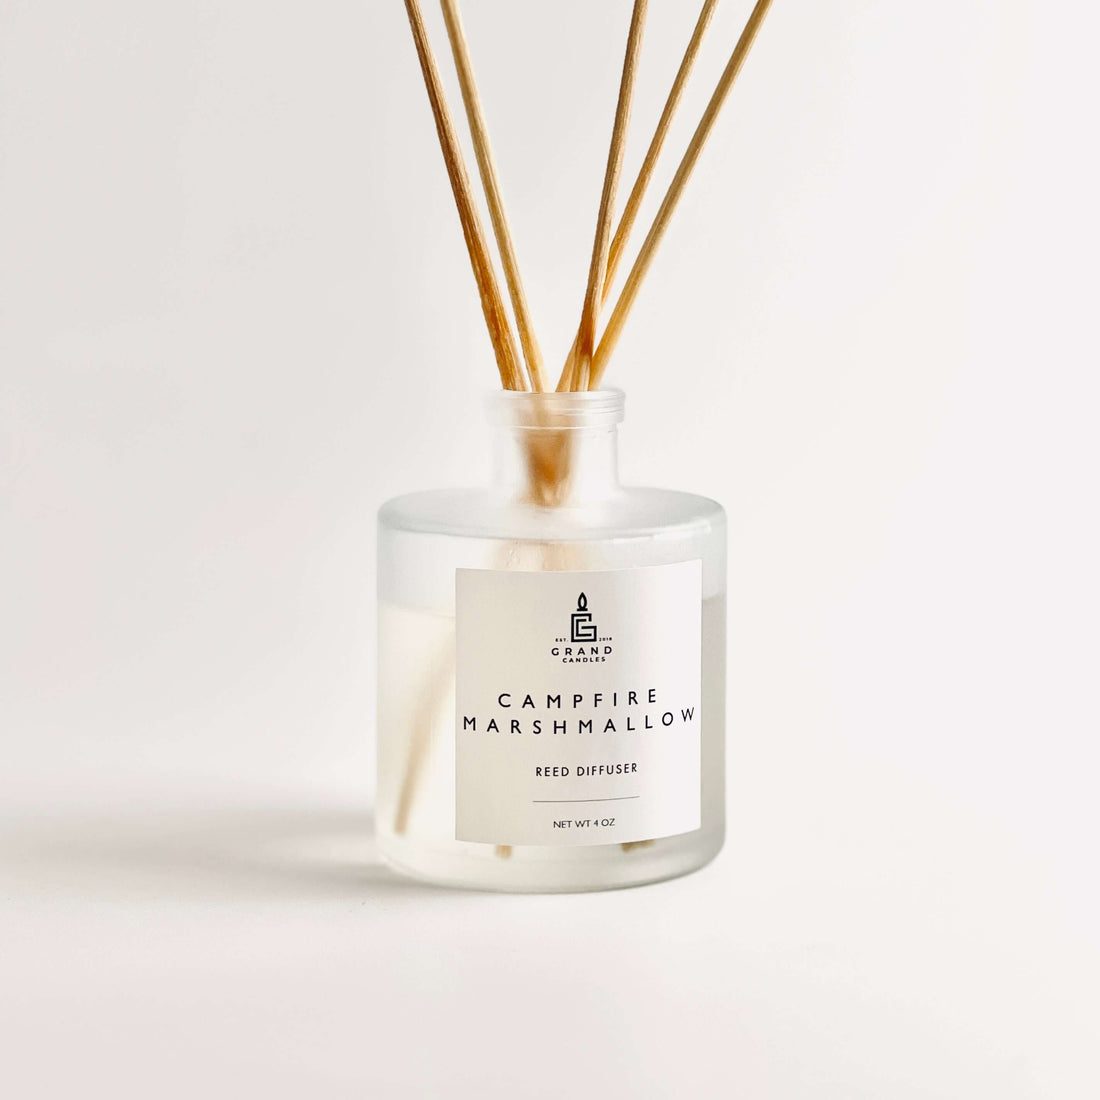 Campfire Marshmallow Reed Diffuser